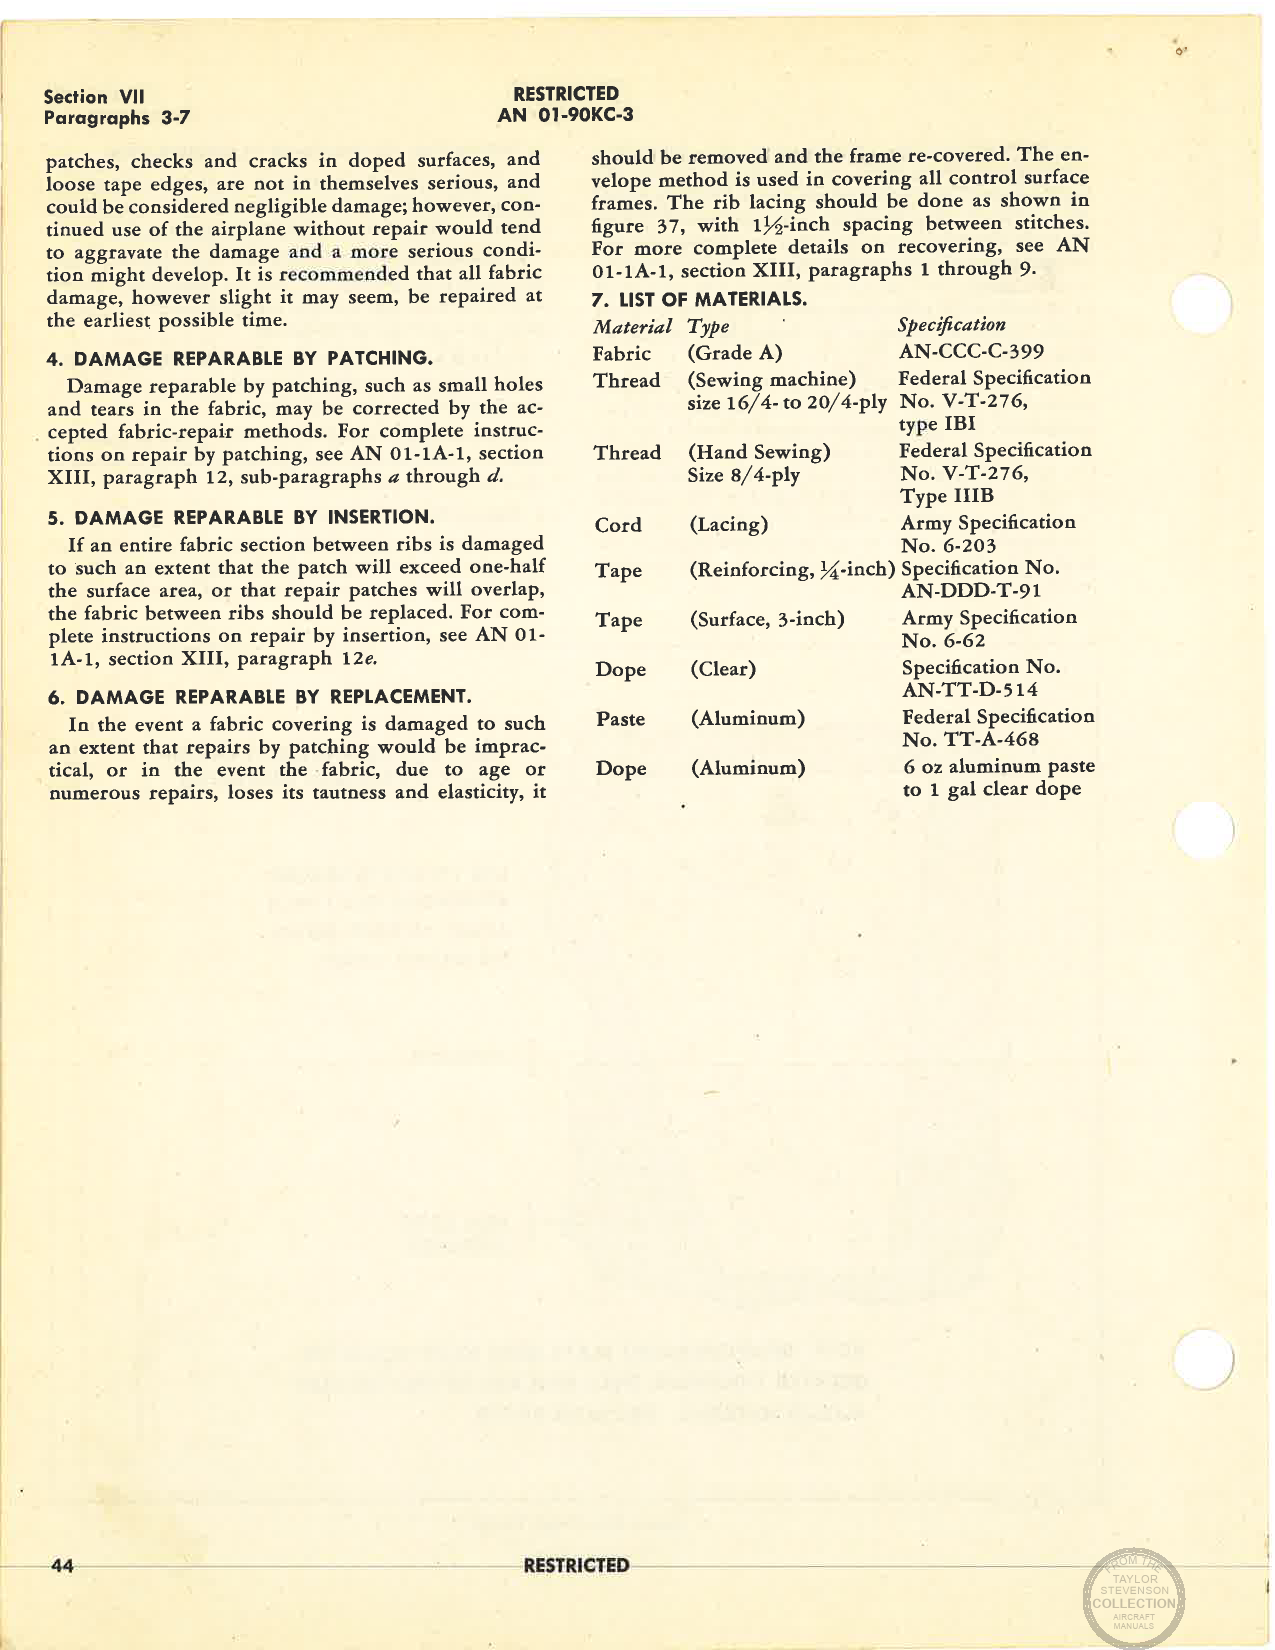 Sample page 48 from AirCorps Library document: Structural Repair Instructions - AT-11